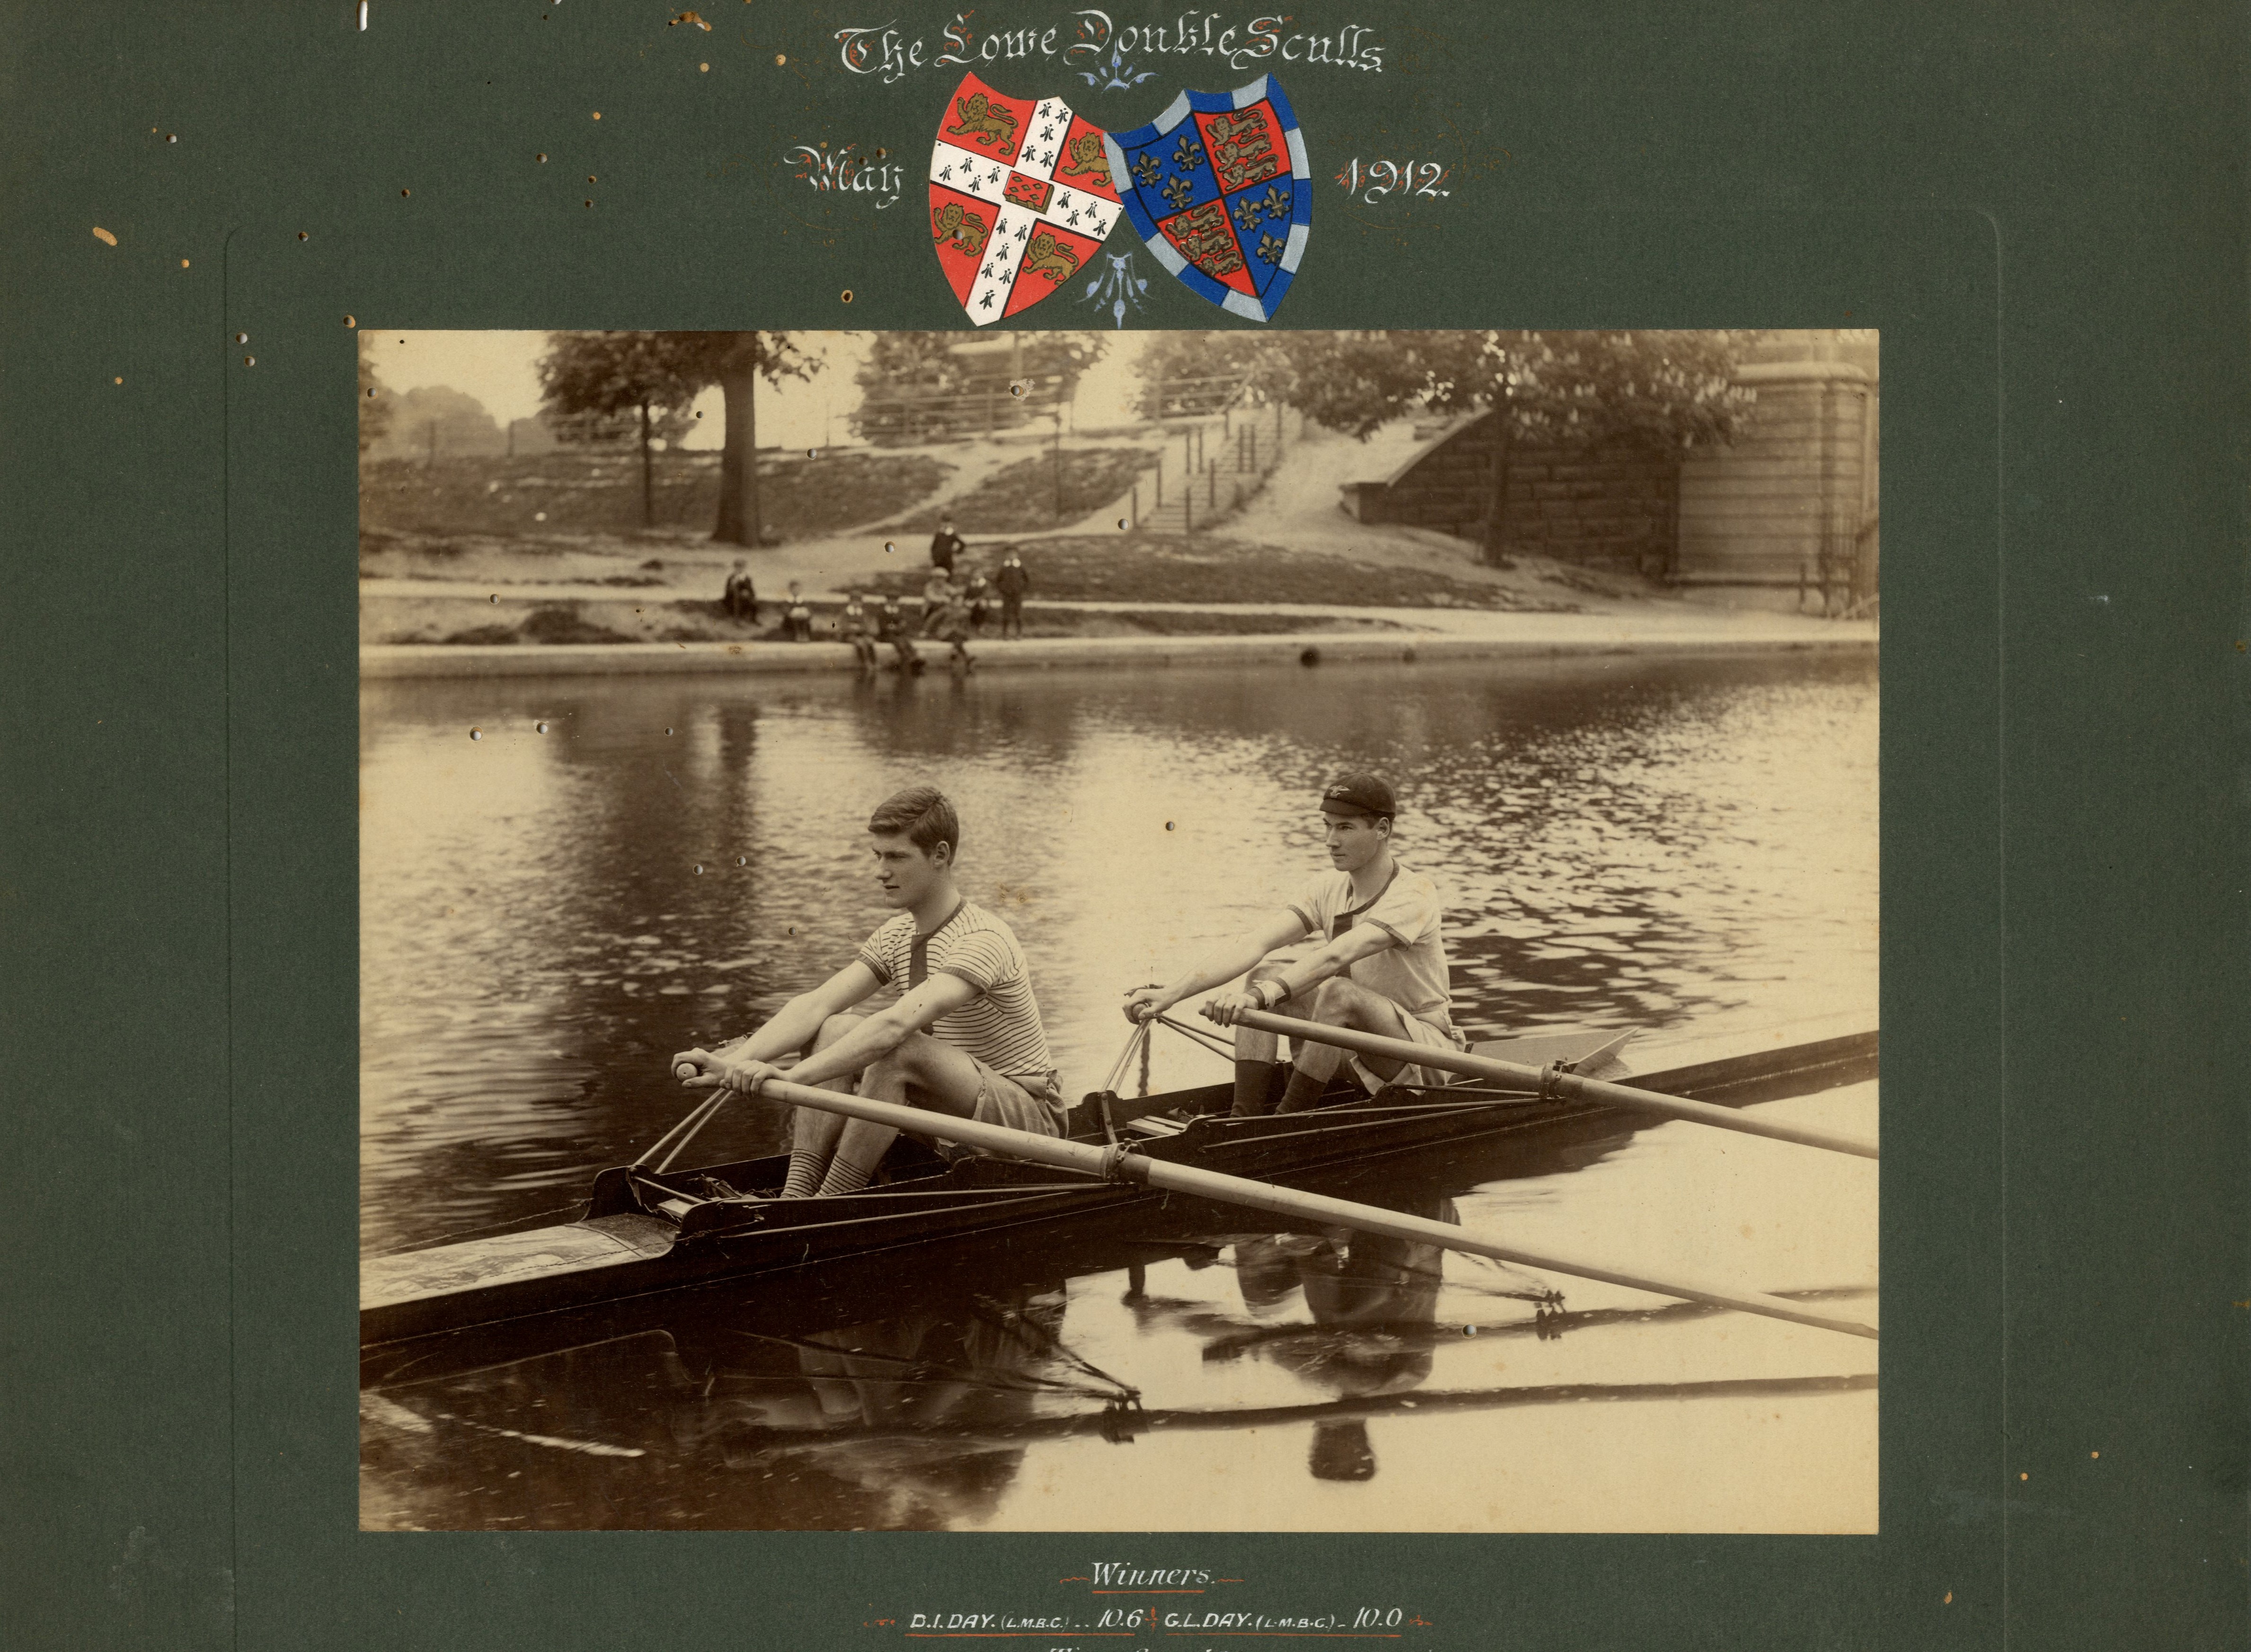 Day brothers in the Lowe Double Sculls